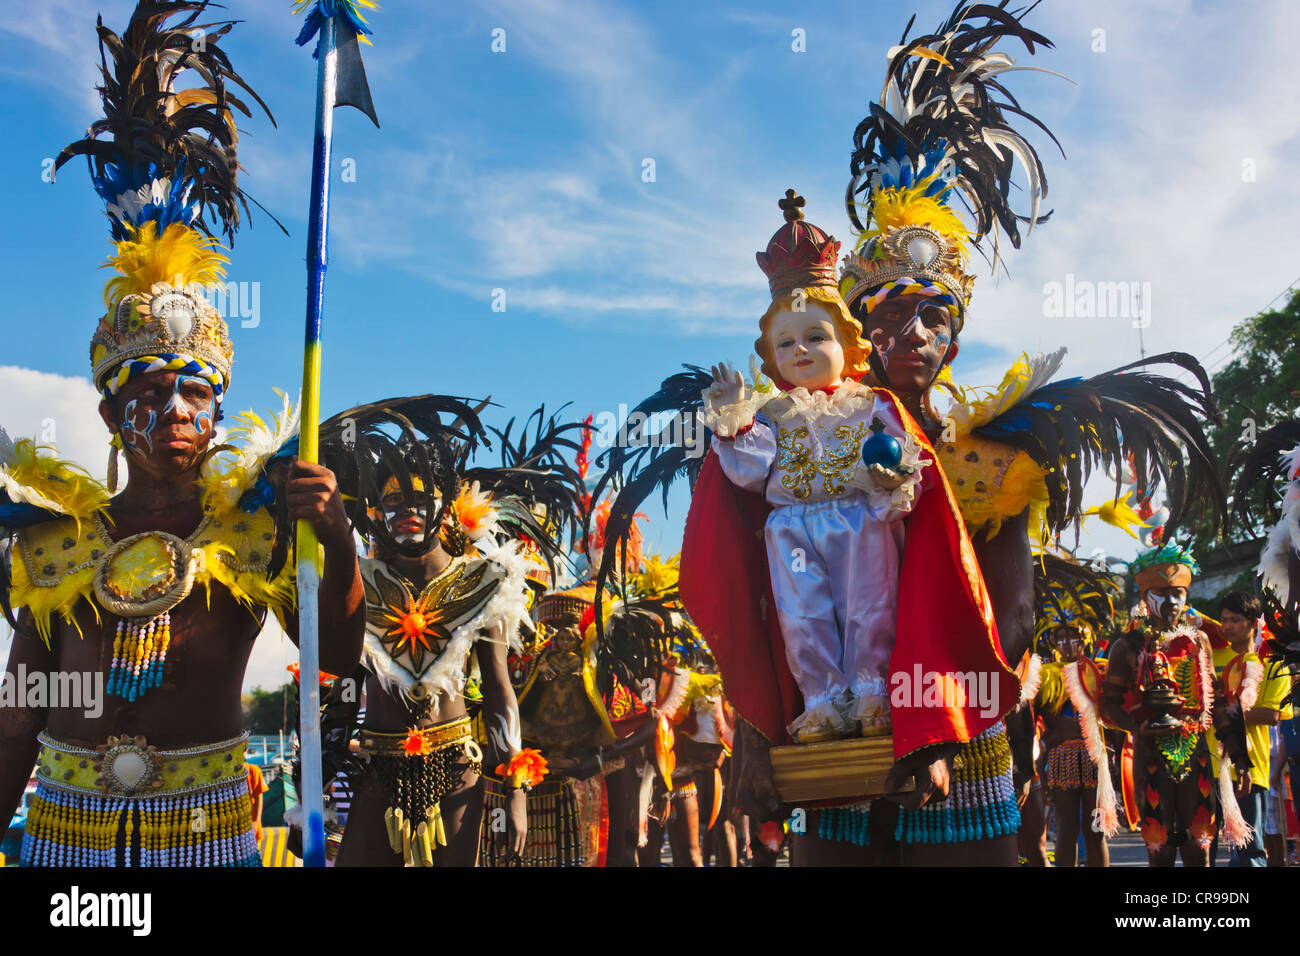 Performer holding sculpture of Santo Nino at Dinagyang Festival, City of Iloilo, Philippines Stock Photo